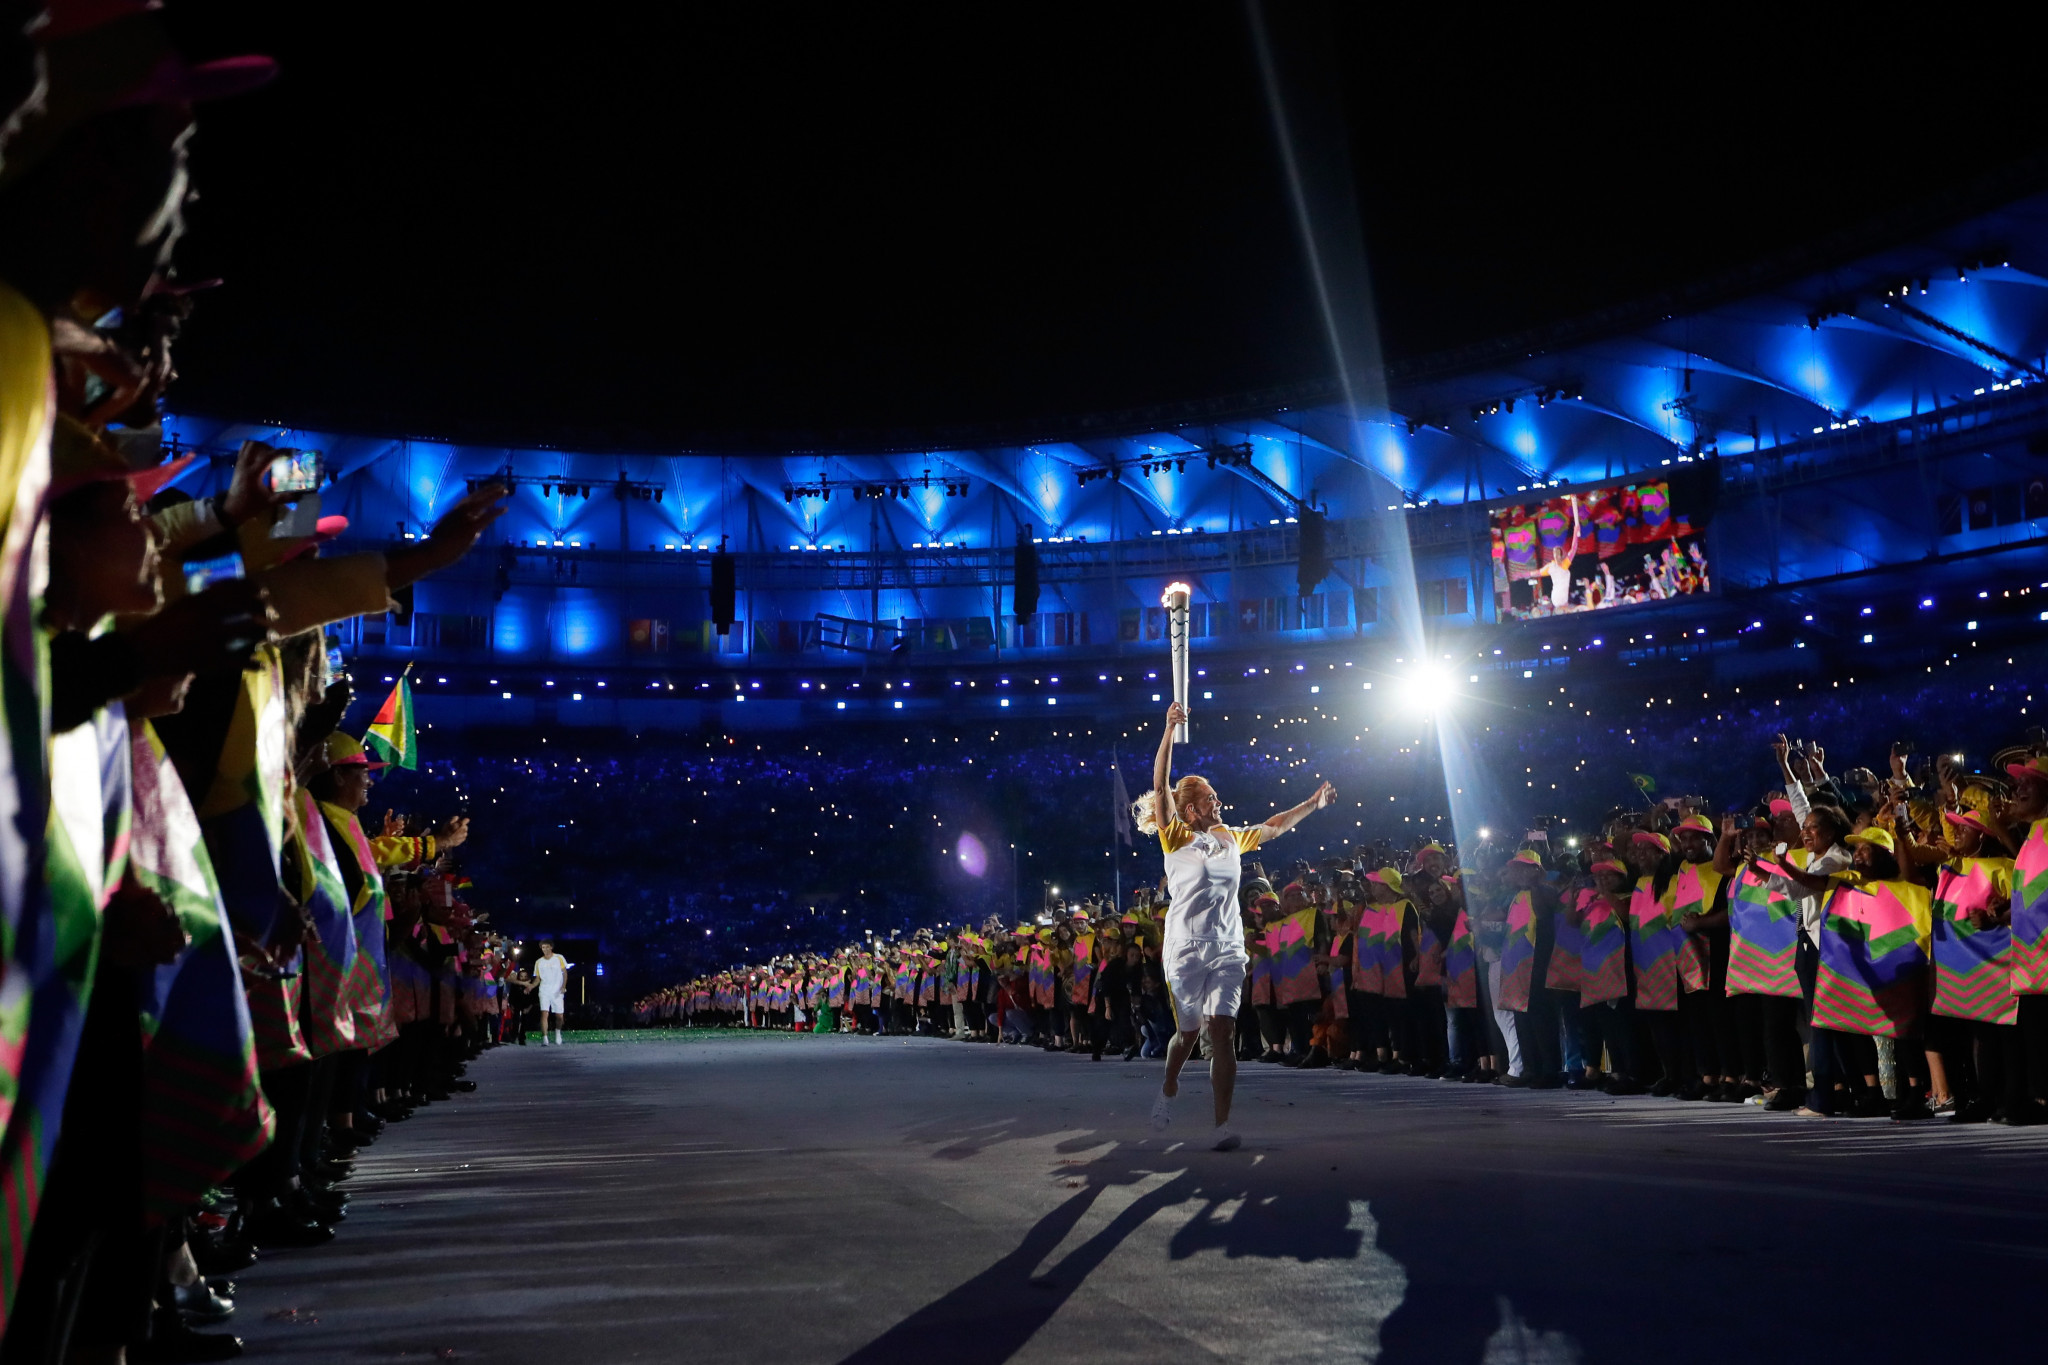 Hortencia Marcari carries the Olympic torch during the Opening Ceremony of the Rio 2016 Olympic Games ©Getty Images